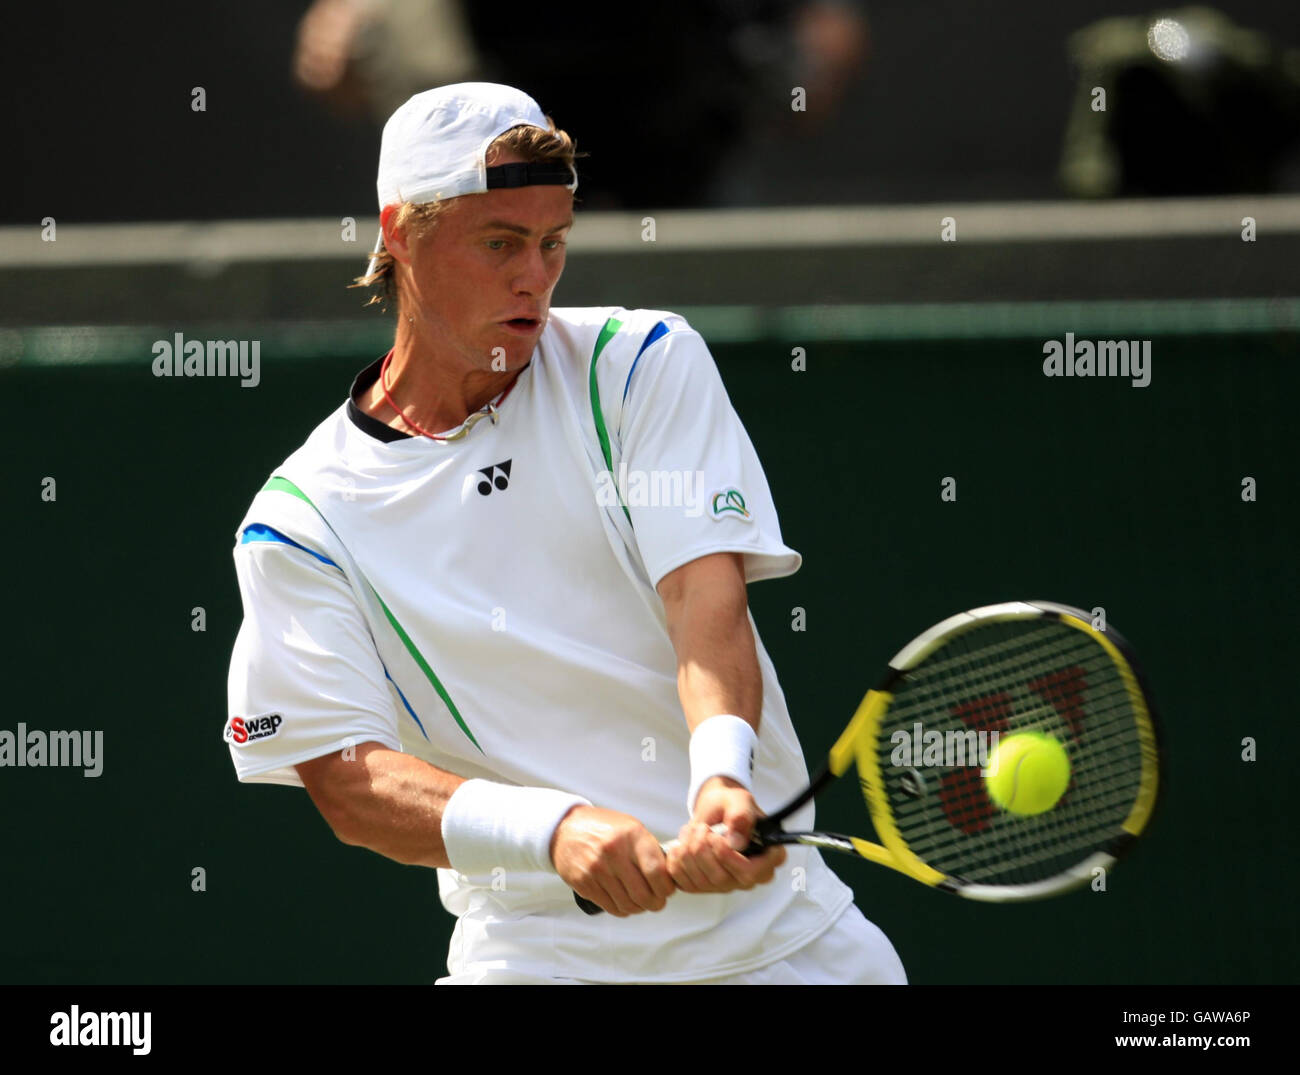 Tennis - Wimbledon Championships 2008 - Day One - The All England Club. Lleyton Hewitt in azione in Australia durante i Wimbledon Championships 2008 presso l'All England Tennis Club di Wimbledon. Foto Stock